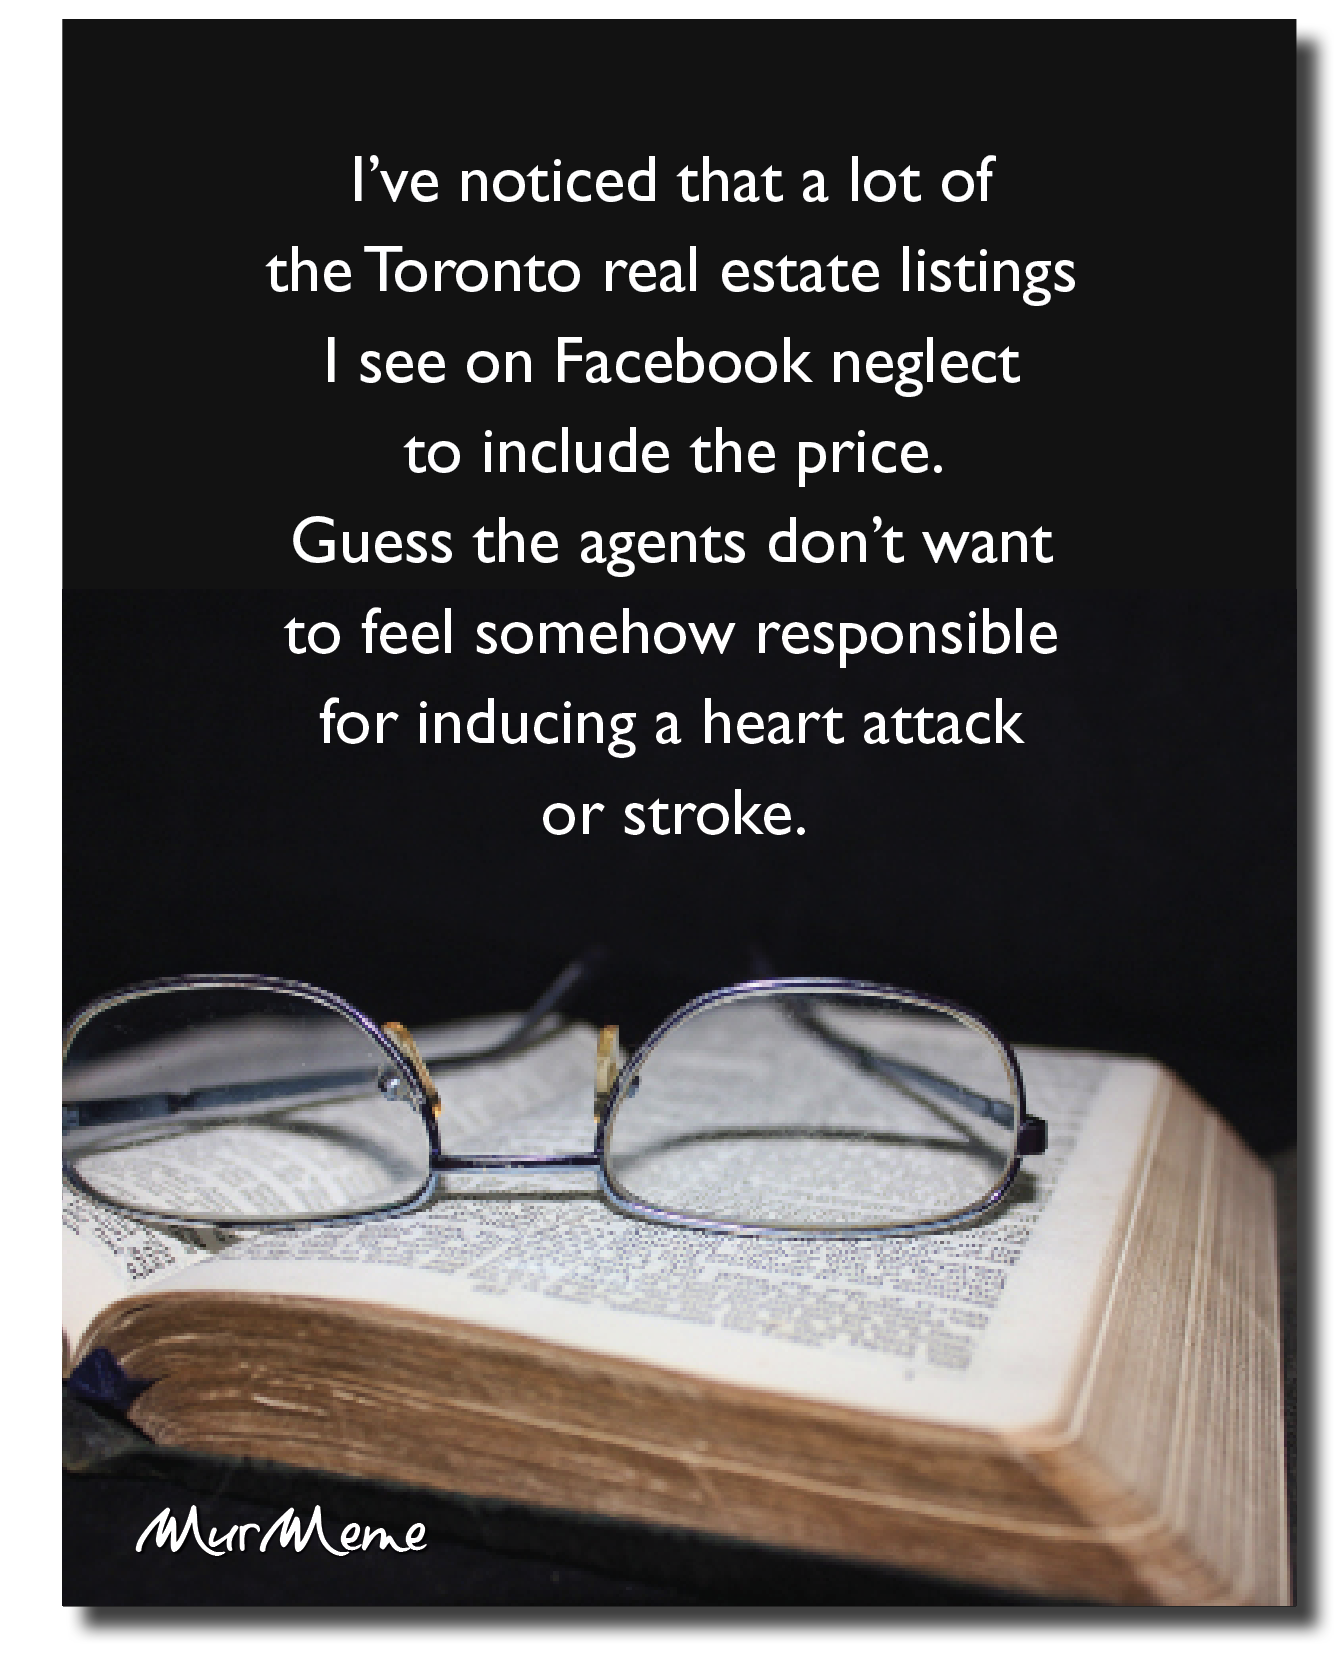 I've noticed that a lot of
the Toronto real estate listings
| see on Facebook neglect
to include the price.
Guess the agents don’t want

to feel somehow responsible

for inducing a heart attack
or stroke.